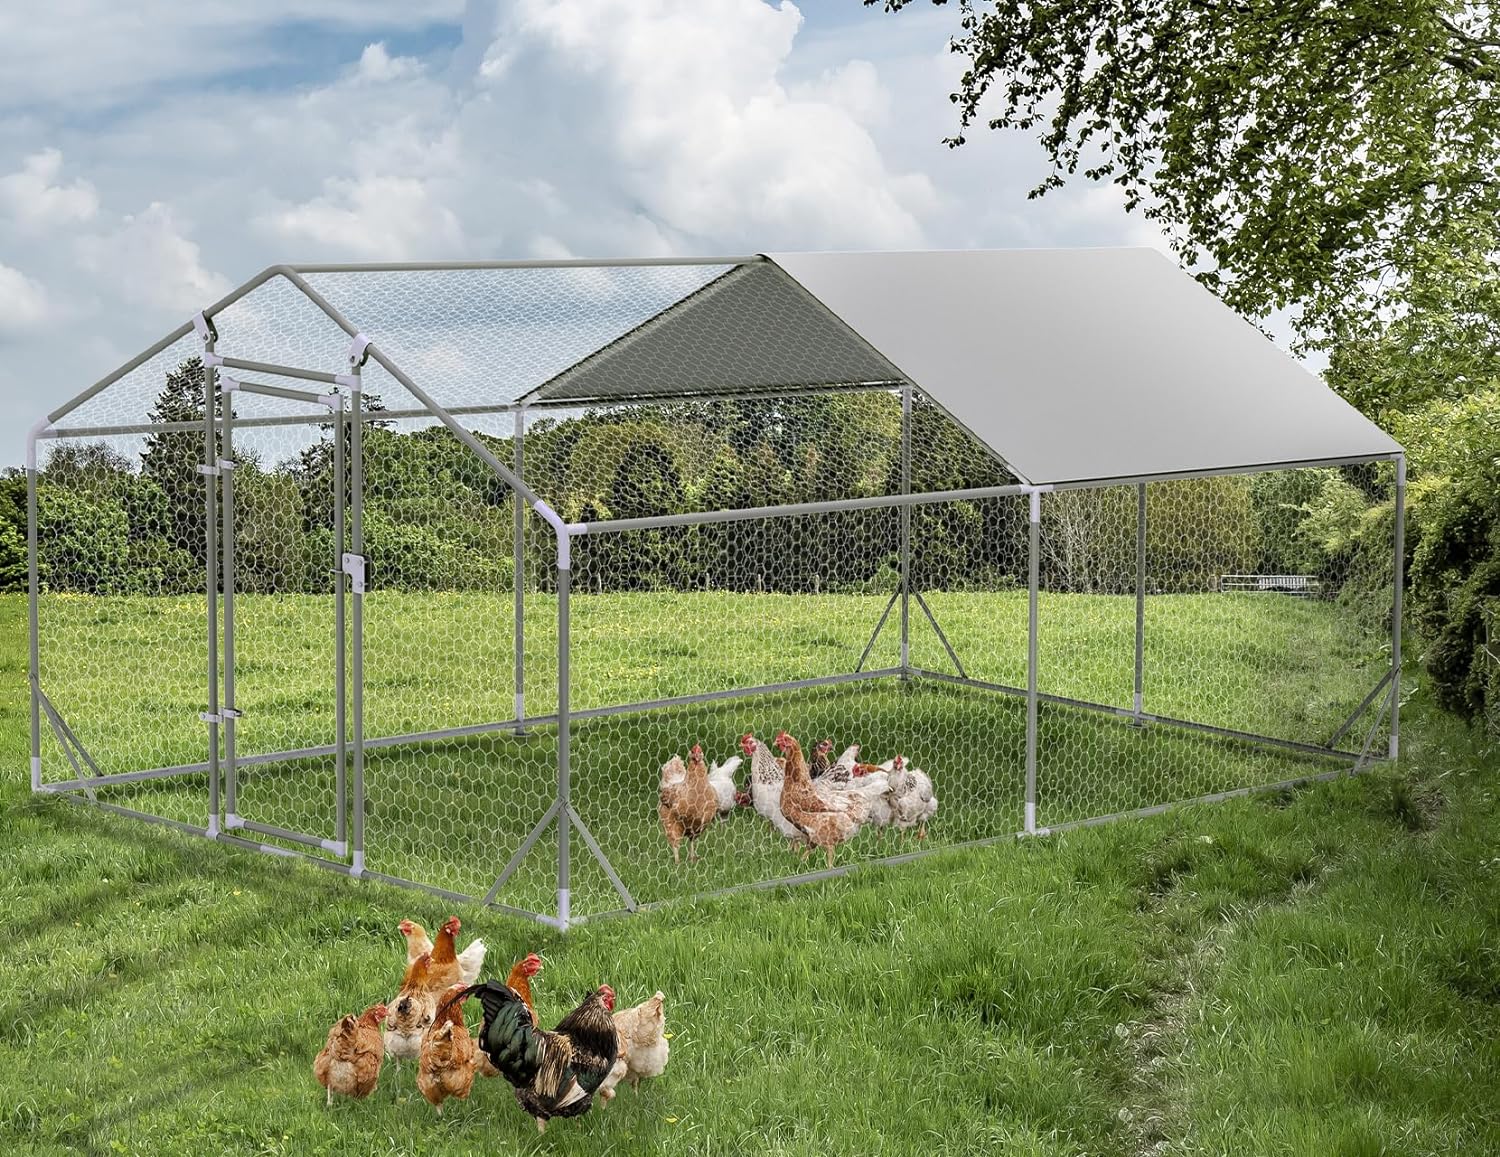 PETSFIT Metal Chicken Coop with Anti-Rust Durable Steel & 420D Anti-Ultraviolet Waterproof Cover, Large Walk-in Poultry Cage Chicken Run Duck House for Outdoor Farm Use 118"x158"x76.8"